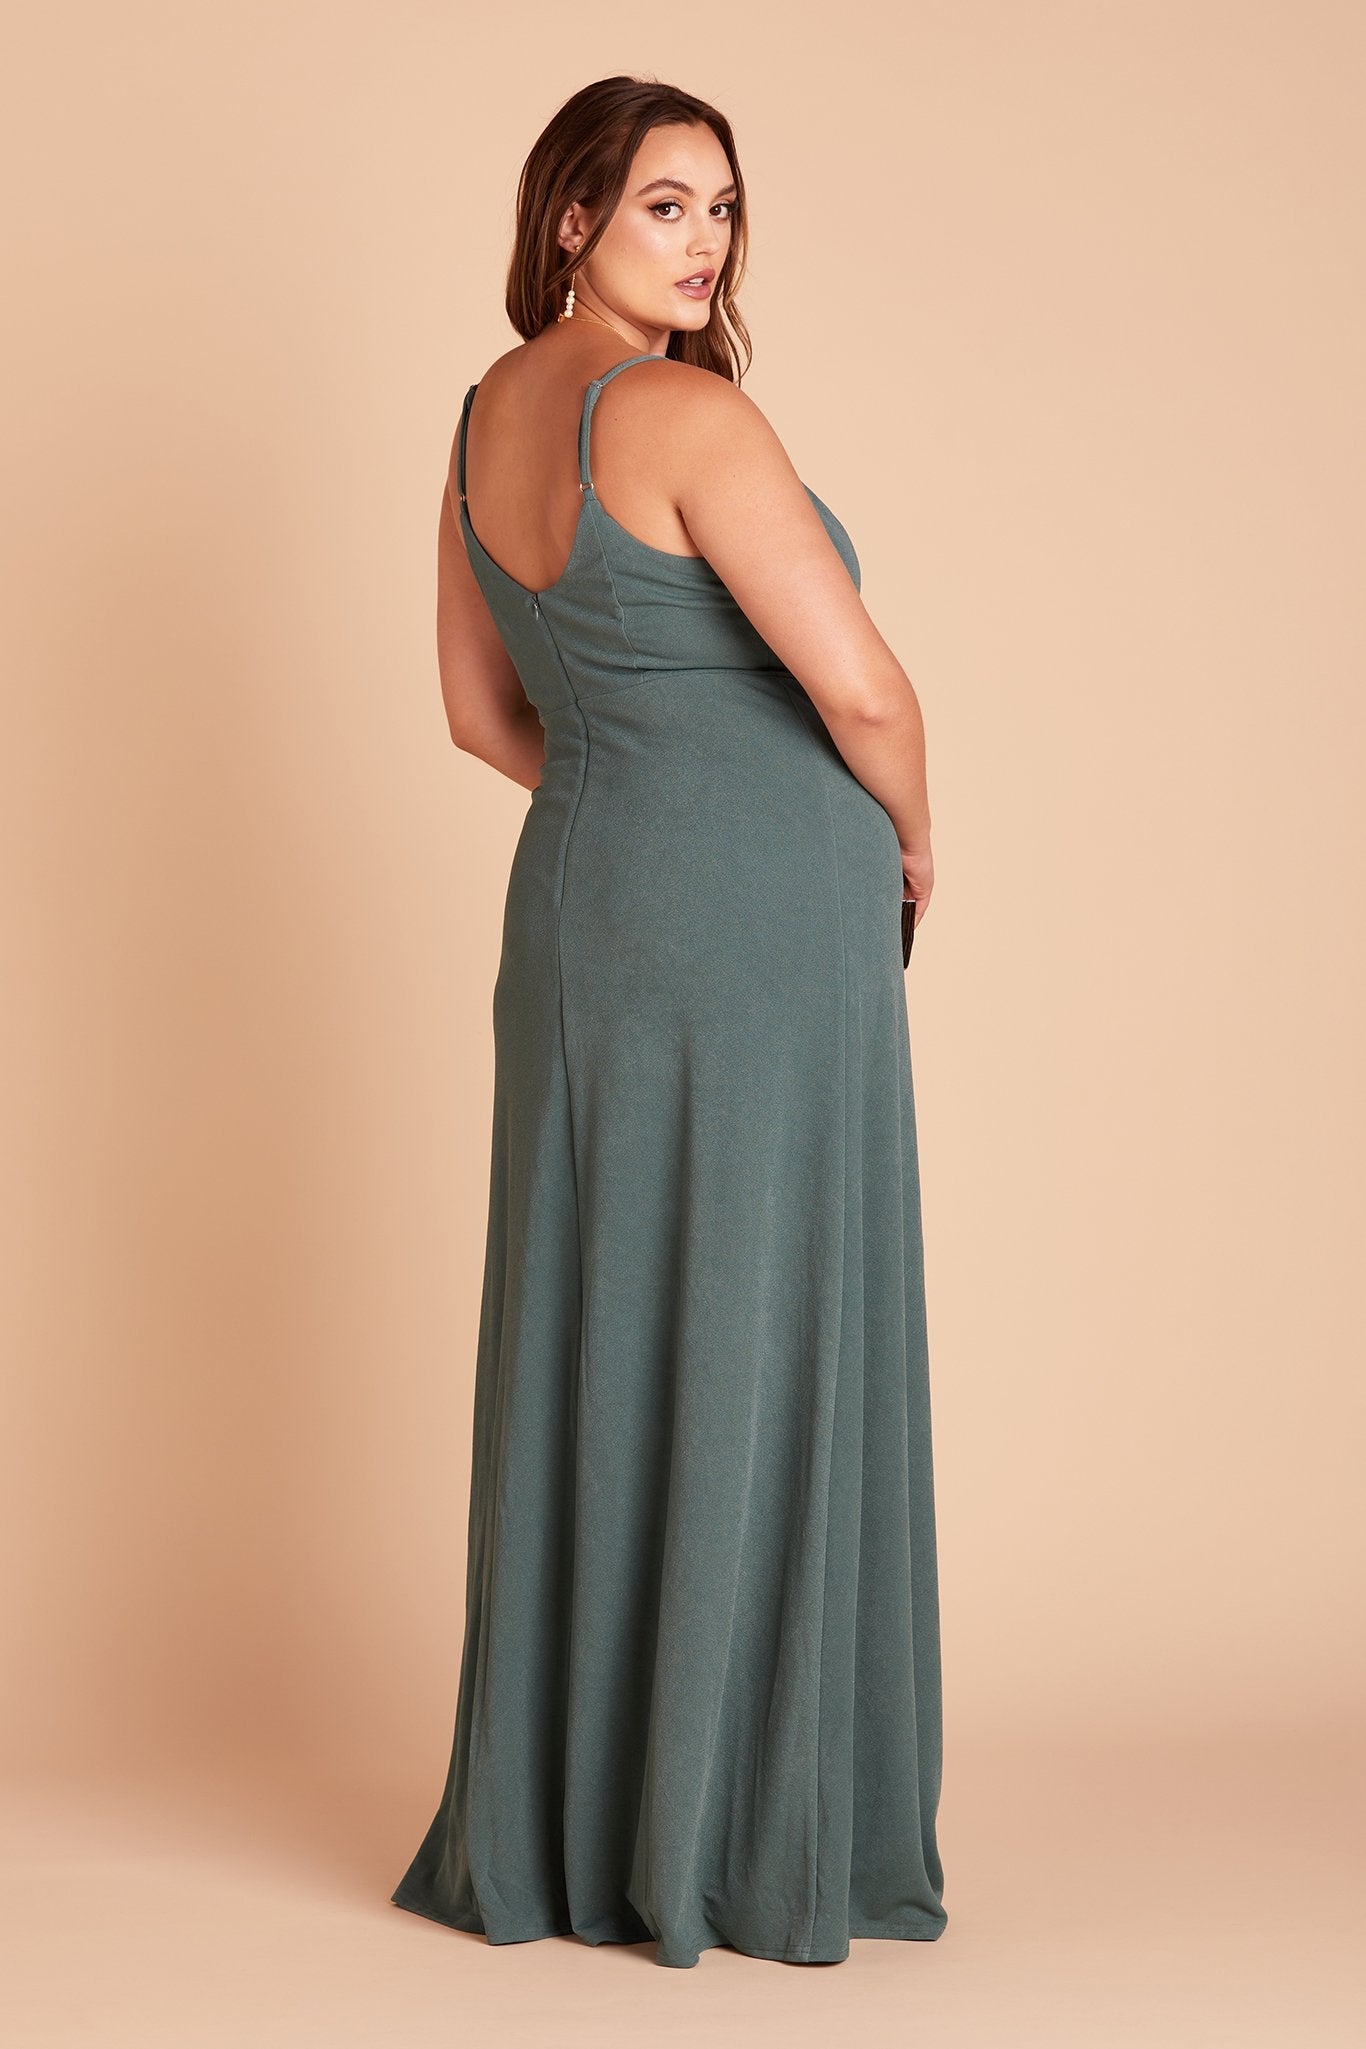 Jay plus size bridesmaid dress with slit in sea glass green crepe by Birdy Grey, side view